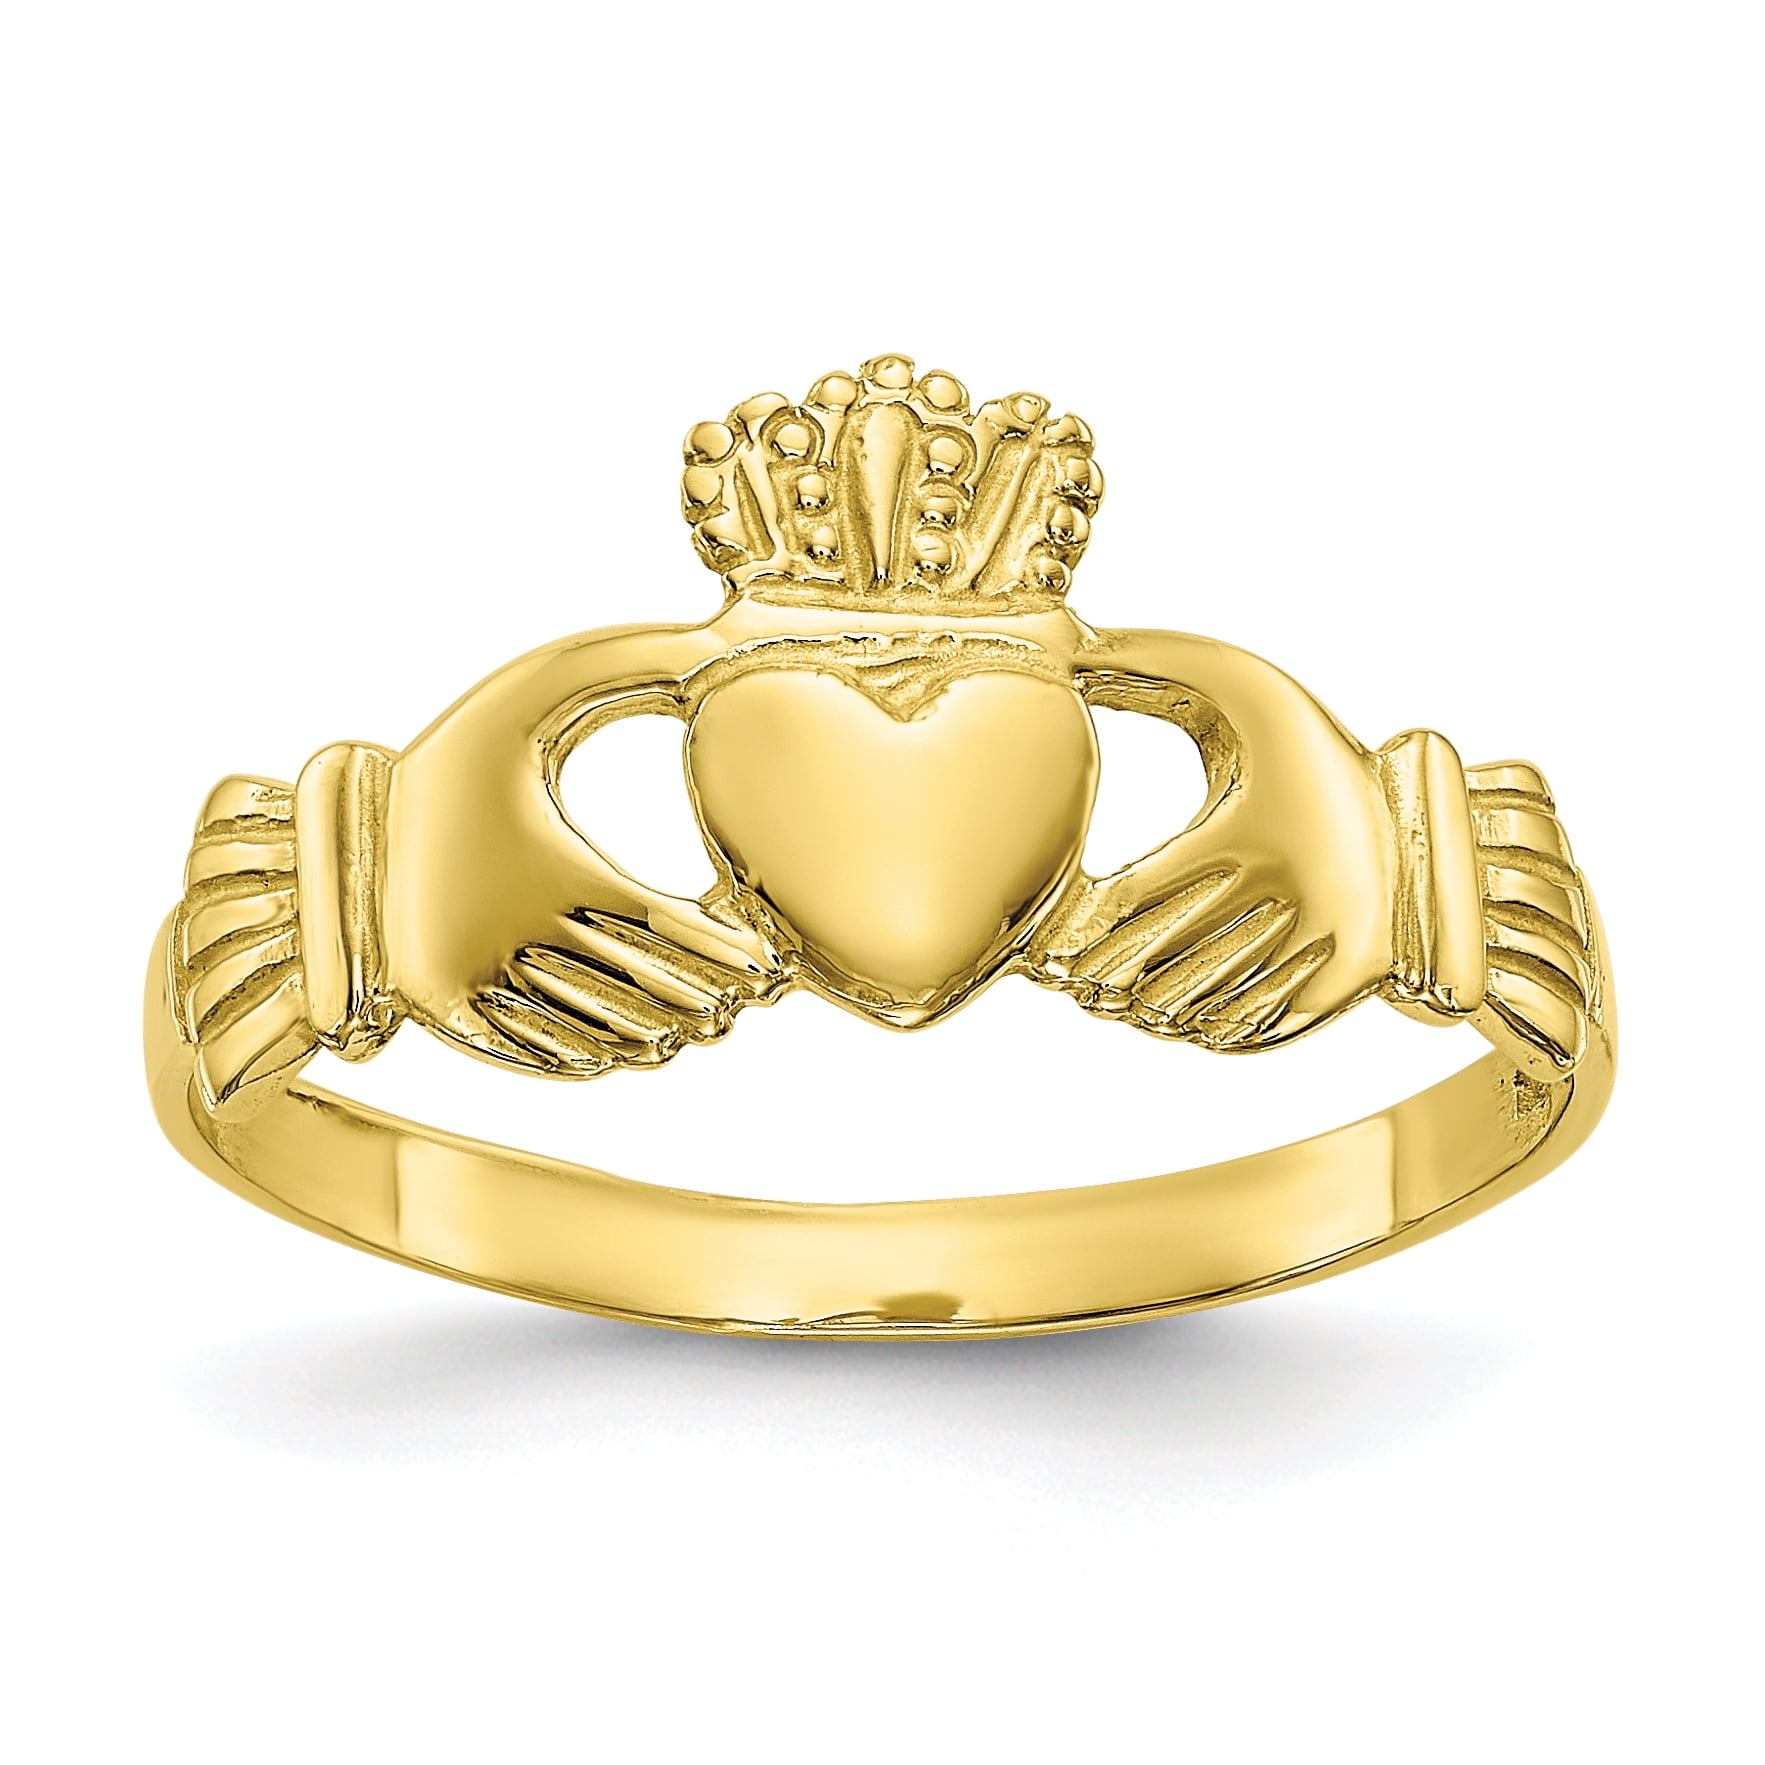 10D1863 9 mm 10K Yellow Gold Polished Ladies Claddagh Ring, Size 7 ...